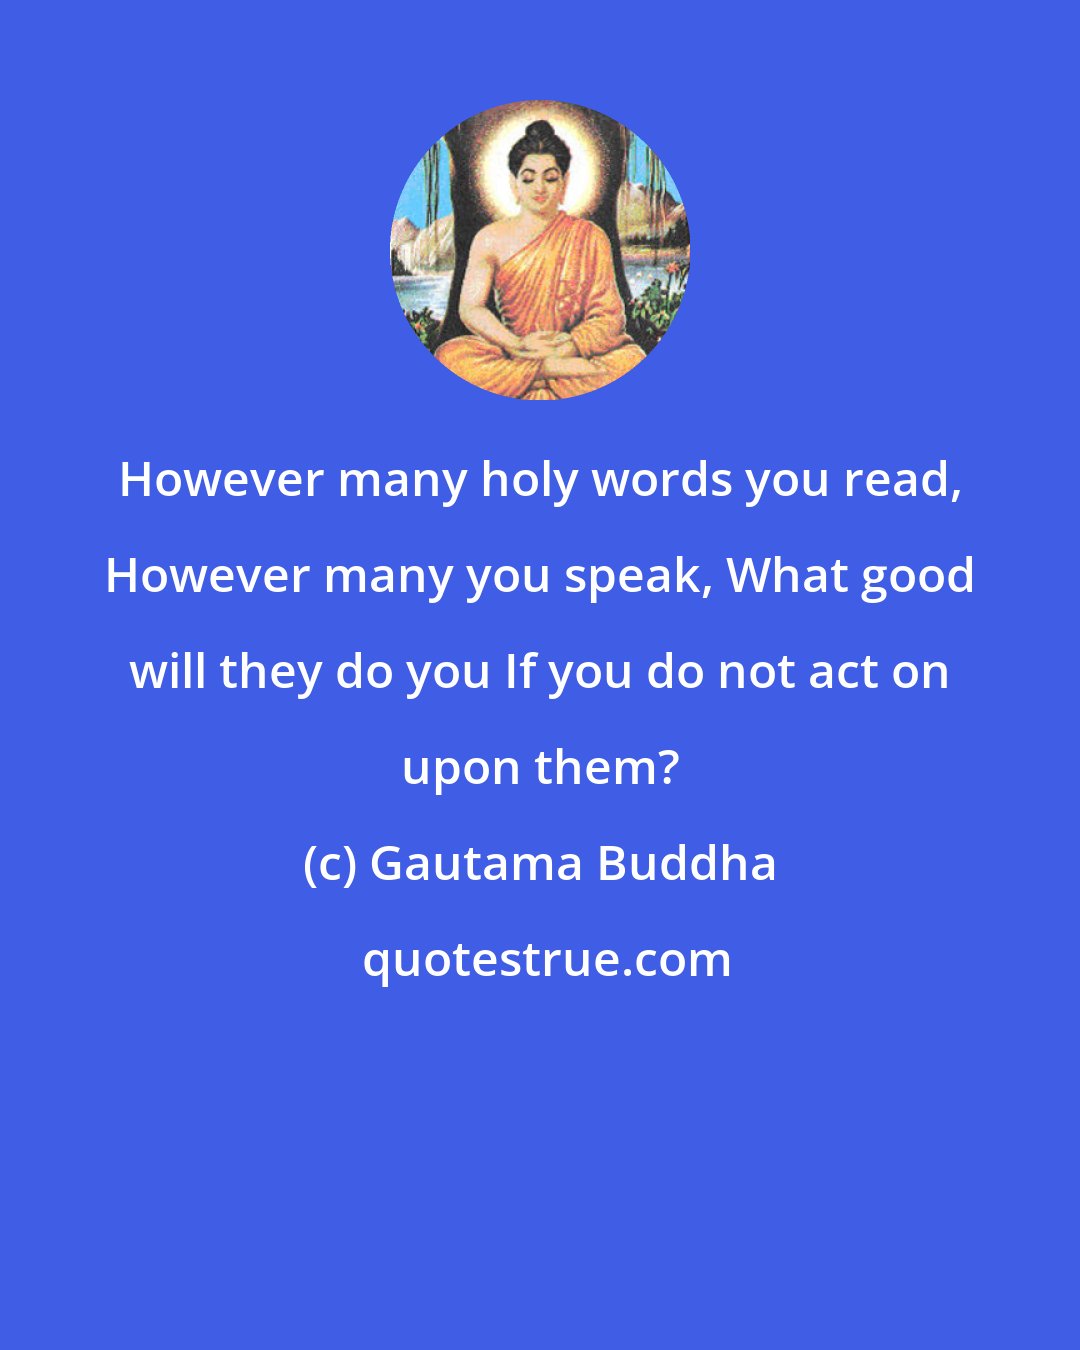 Gautama Buddha: However many holy words you read, However many you speak, What good will they do you If you do not act on upon them?